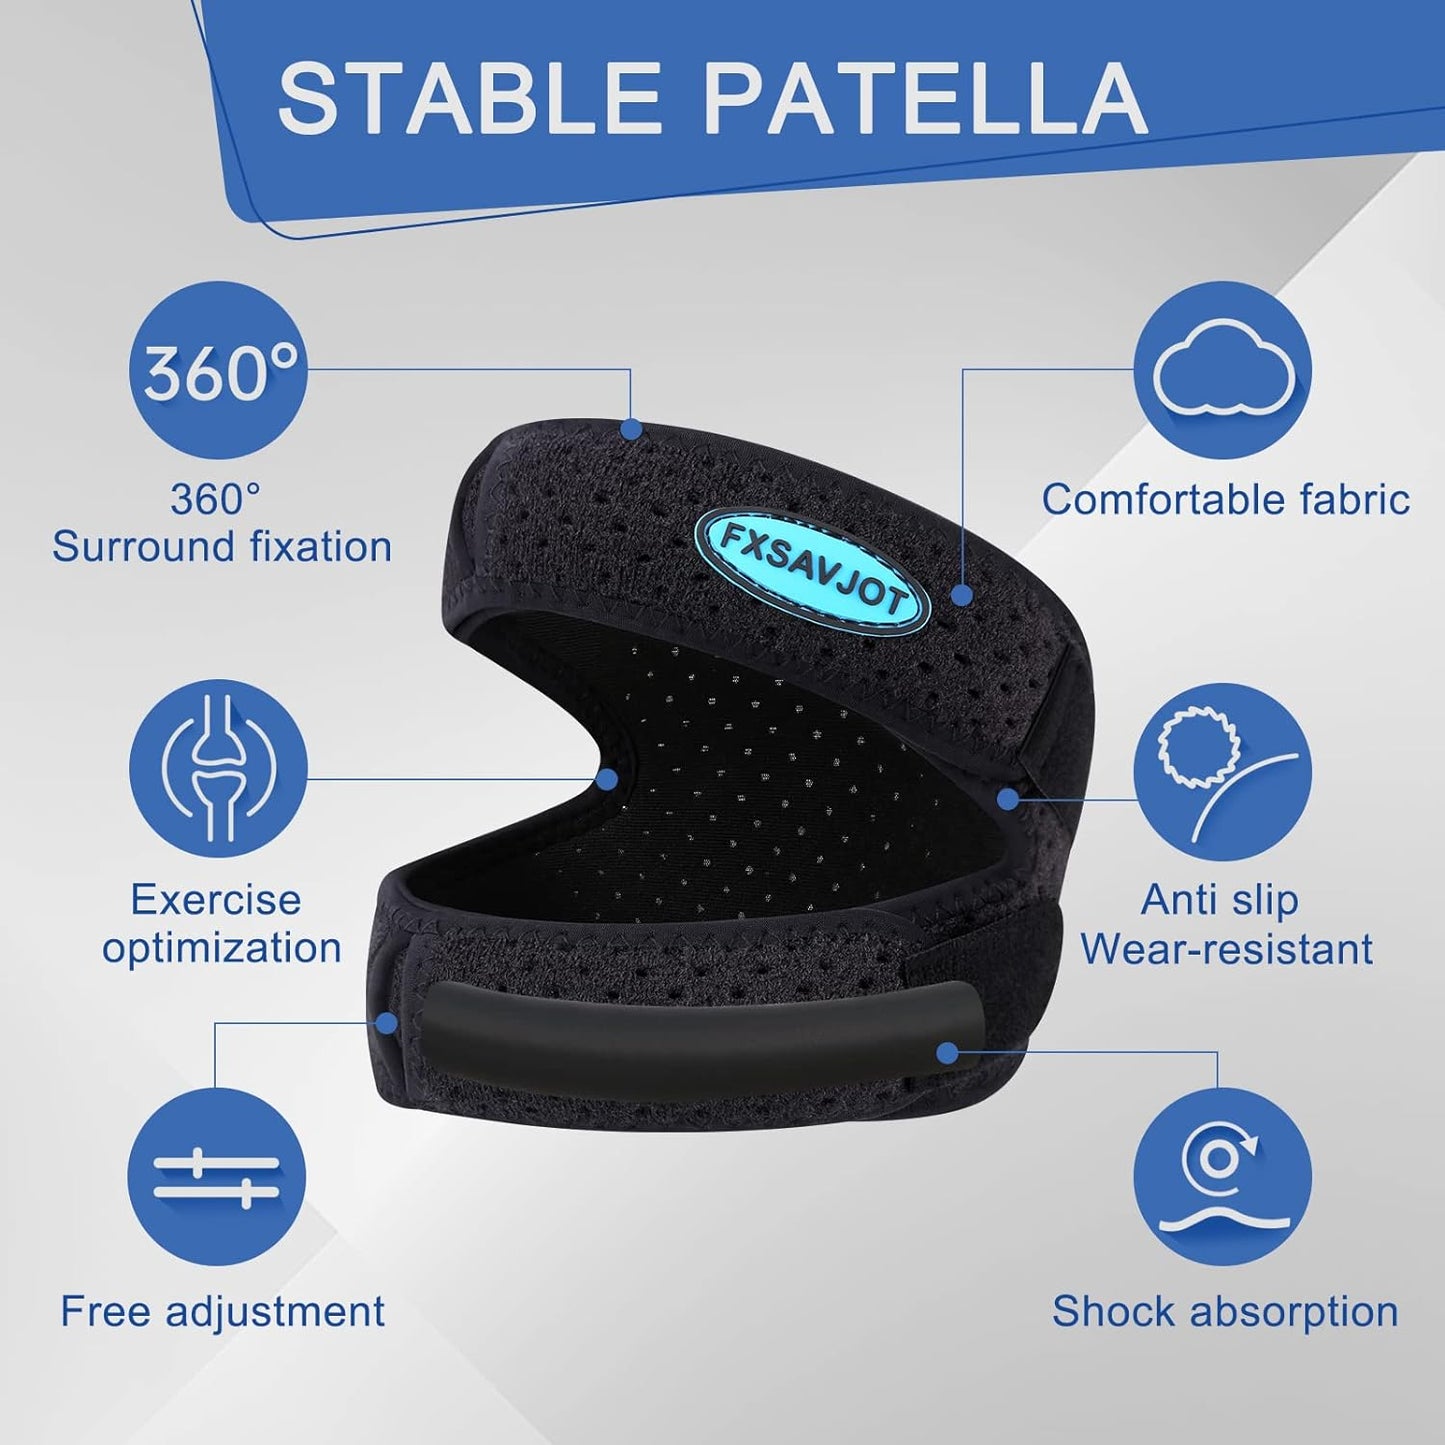 New Professional Patella Knee Brace Pro for Knee Pain/Meniscus Tear, Adjustable Compression Patellar Tendon Support Strap for Man and Women/Outdoor Activities(Black, Small)